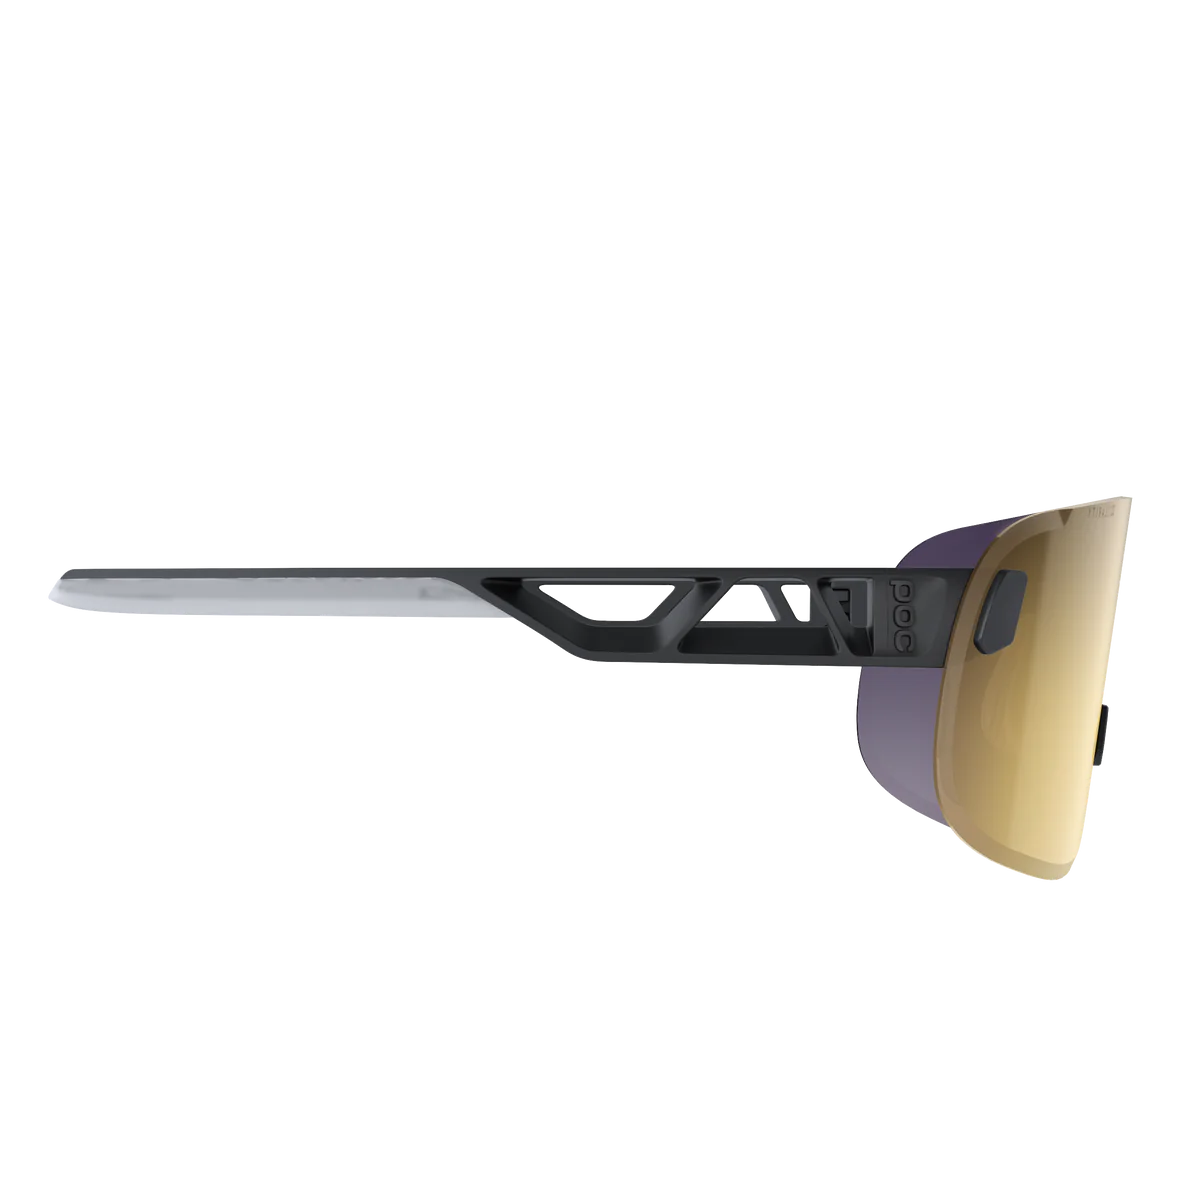 POC Elicit Clarity Road Cycling Glasses